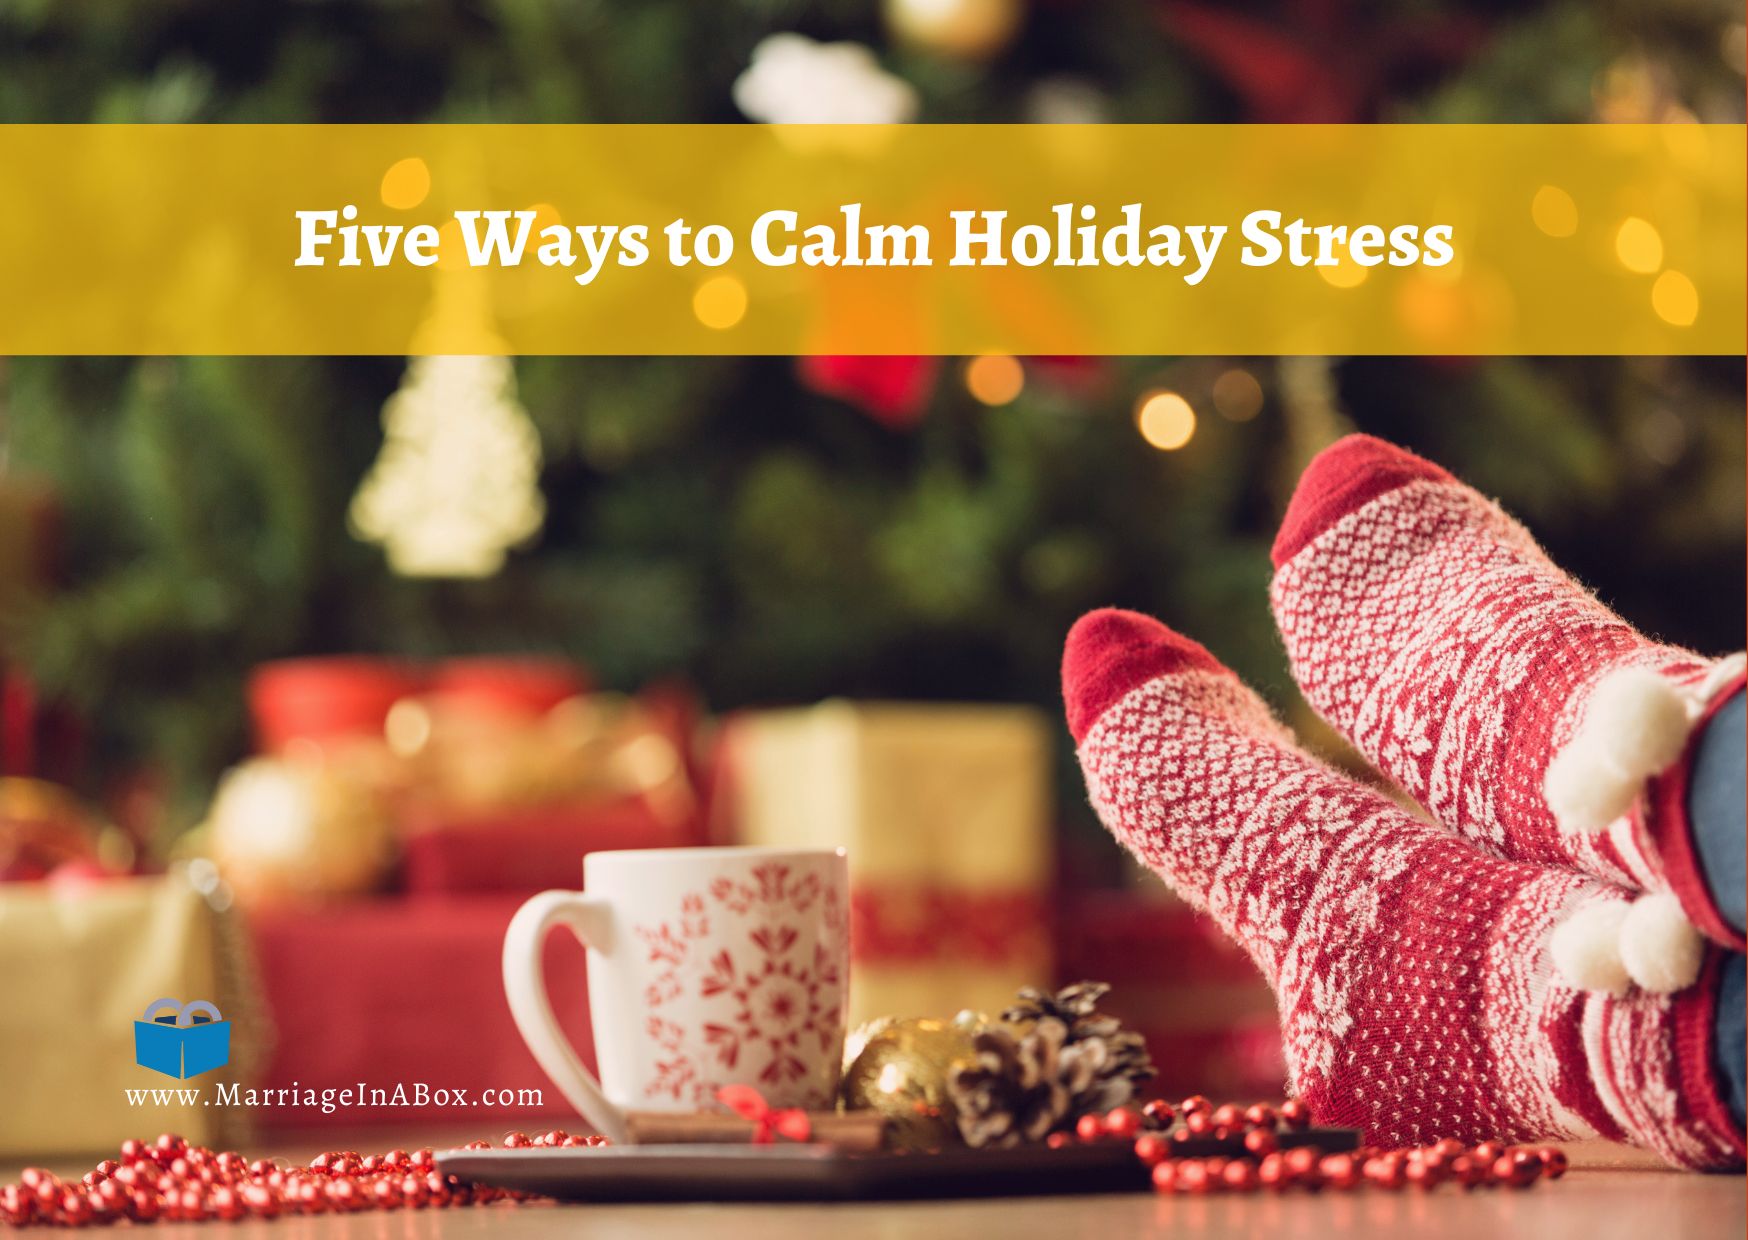 Marriage in a Box: Five Ways to Calm Holiday Stress